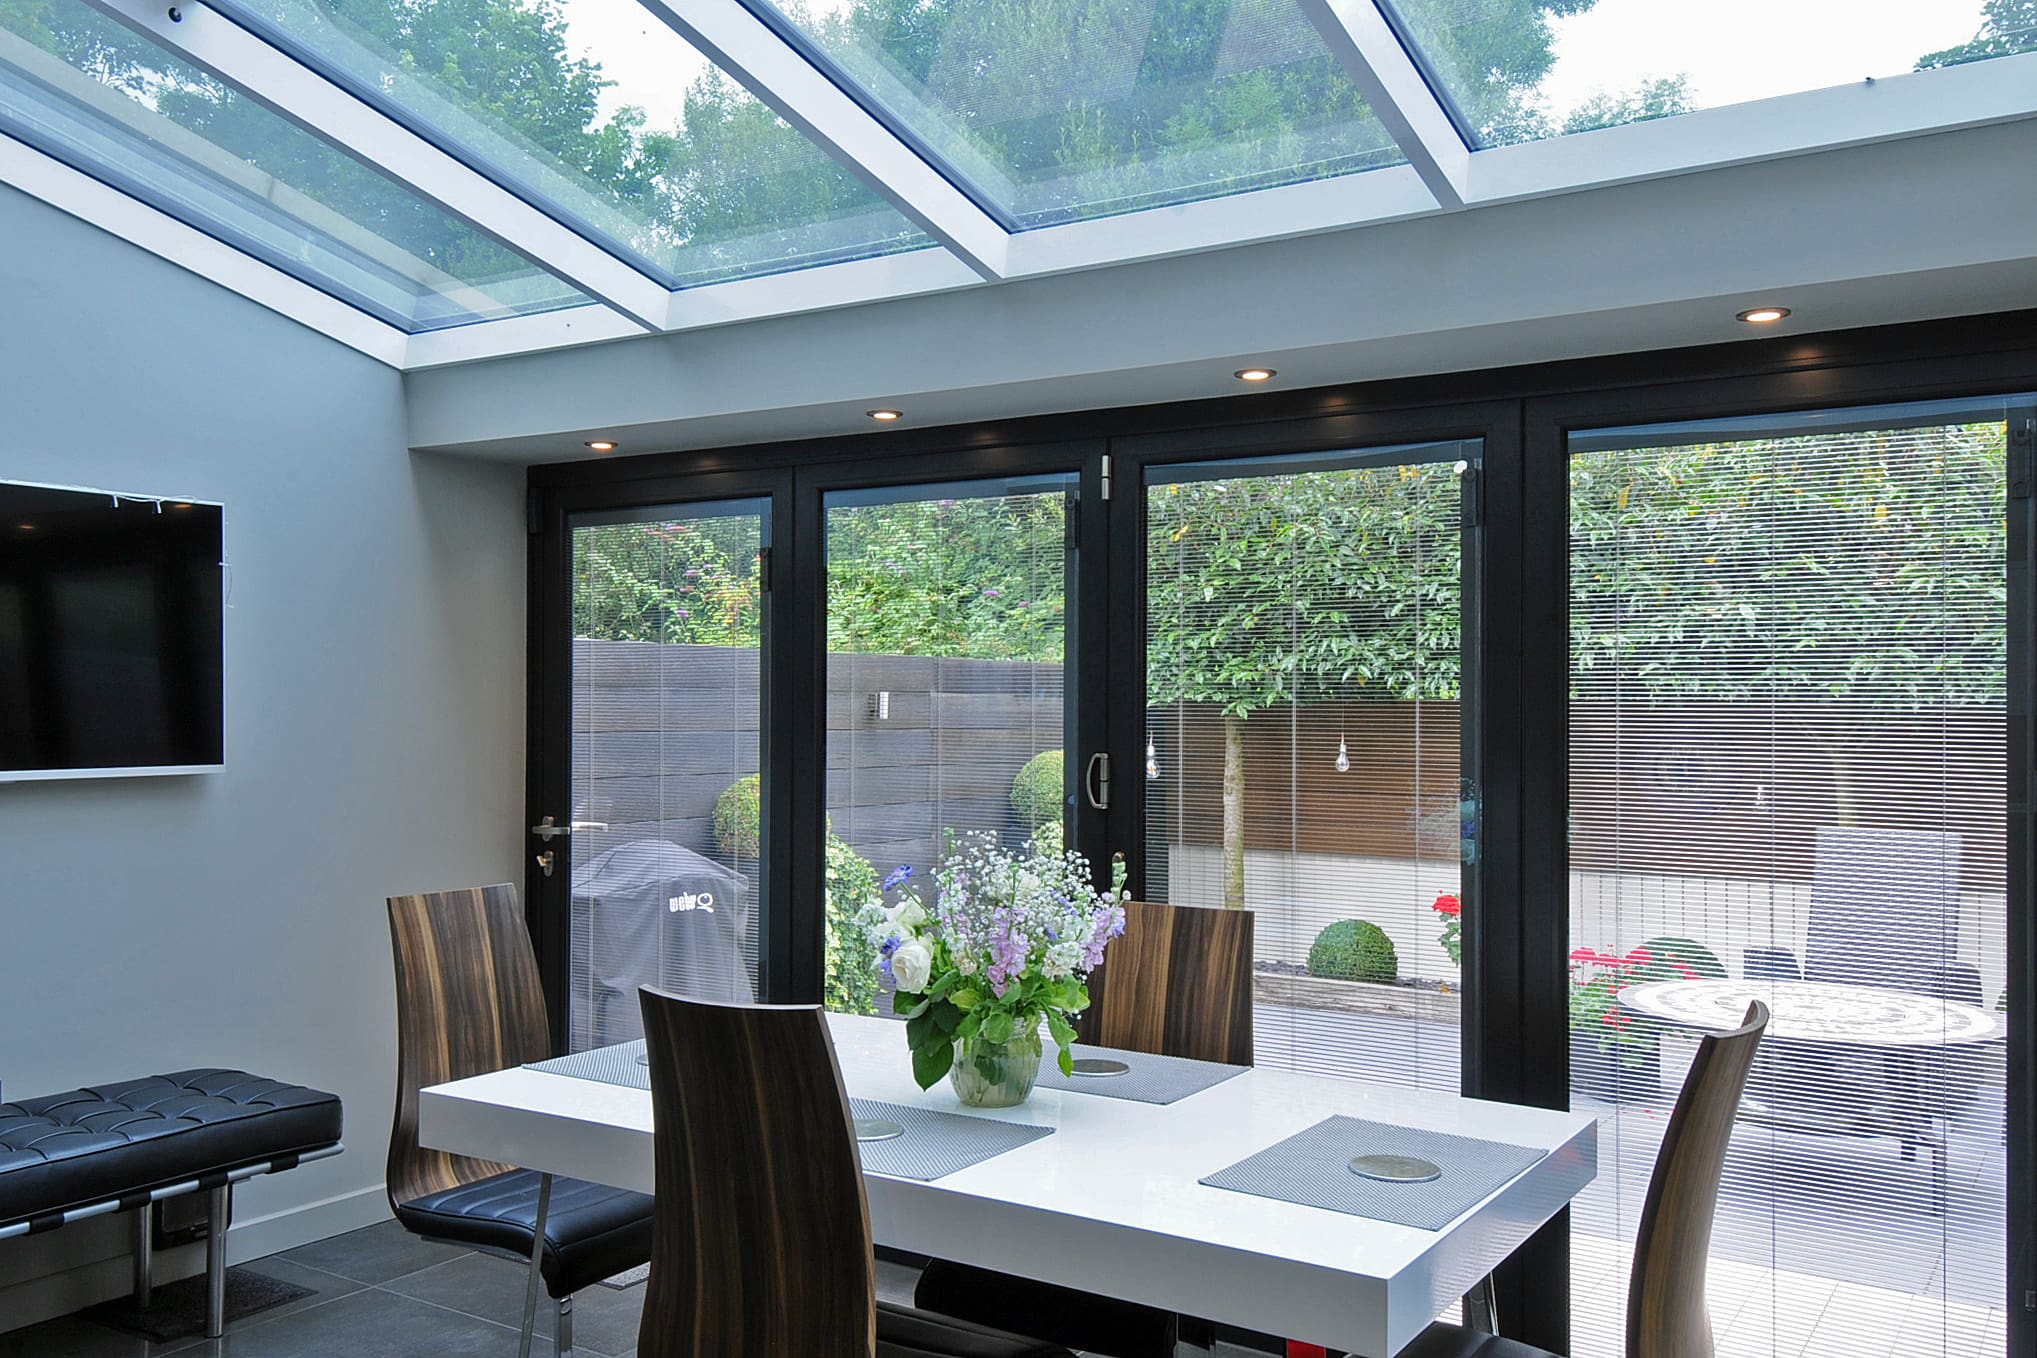 Dining room extension with bi-folding doors and bright roof light.